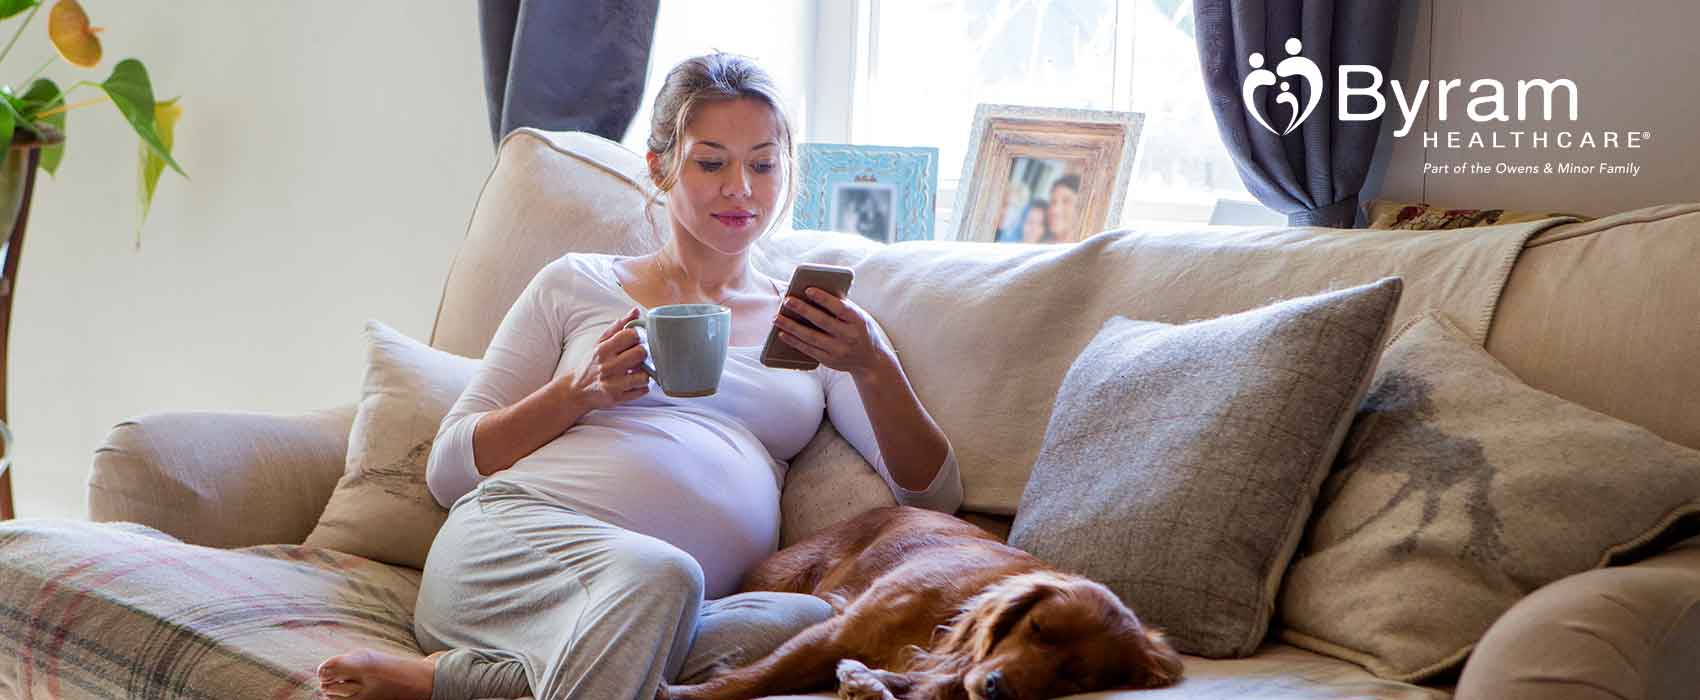 Woman on couch with smart phone and coffee mug